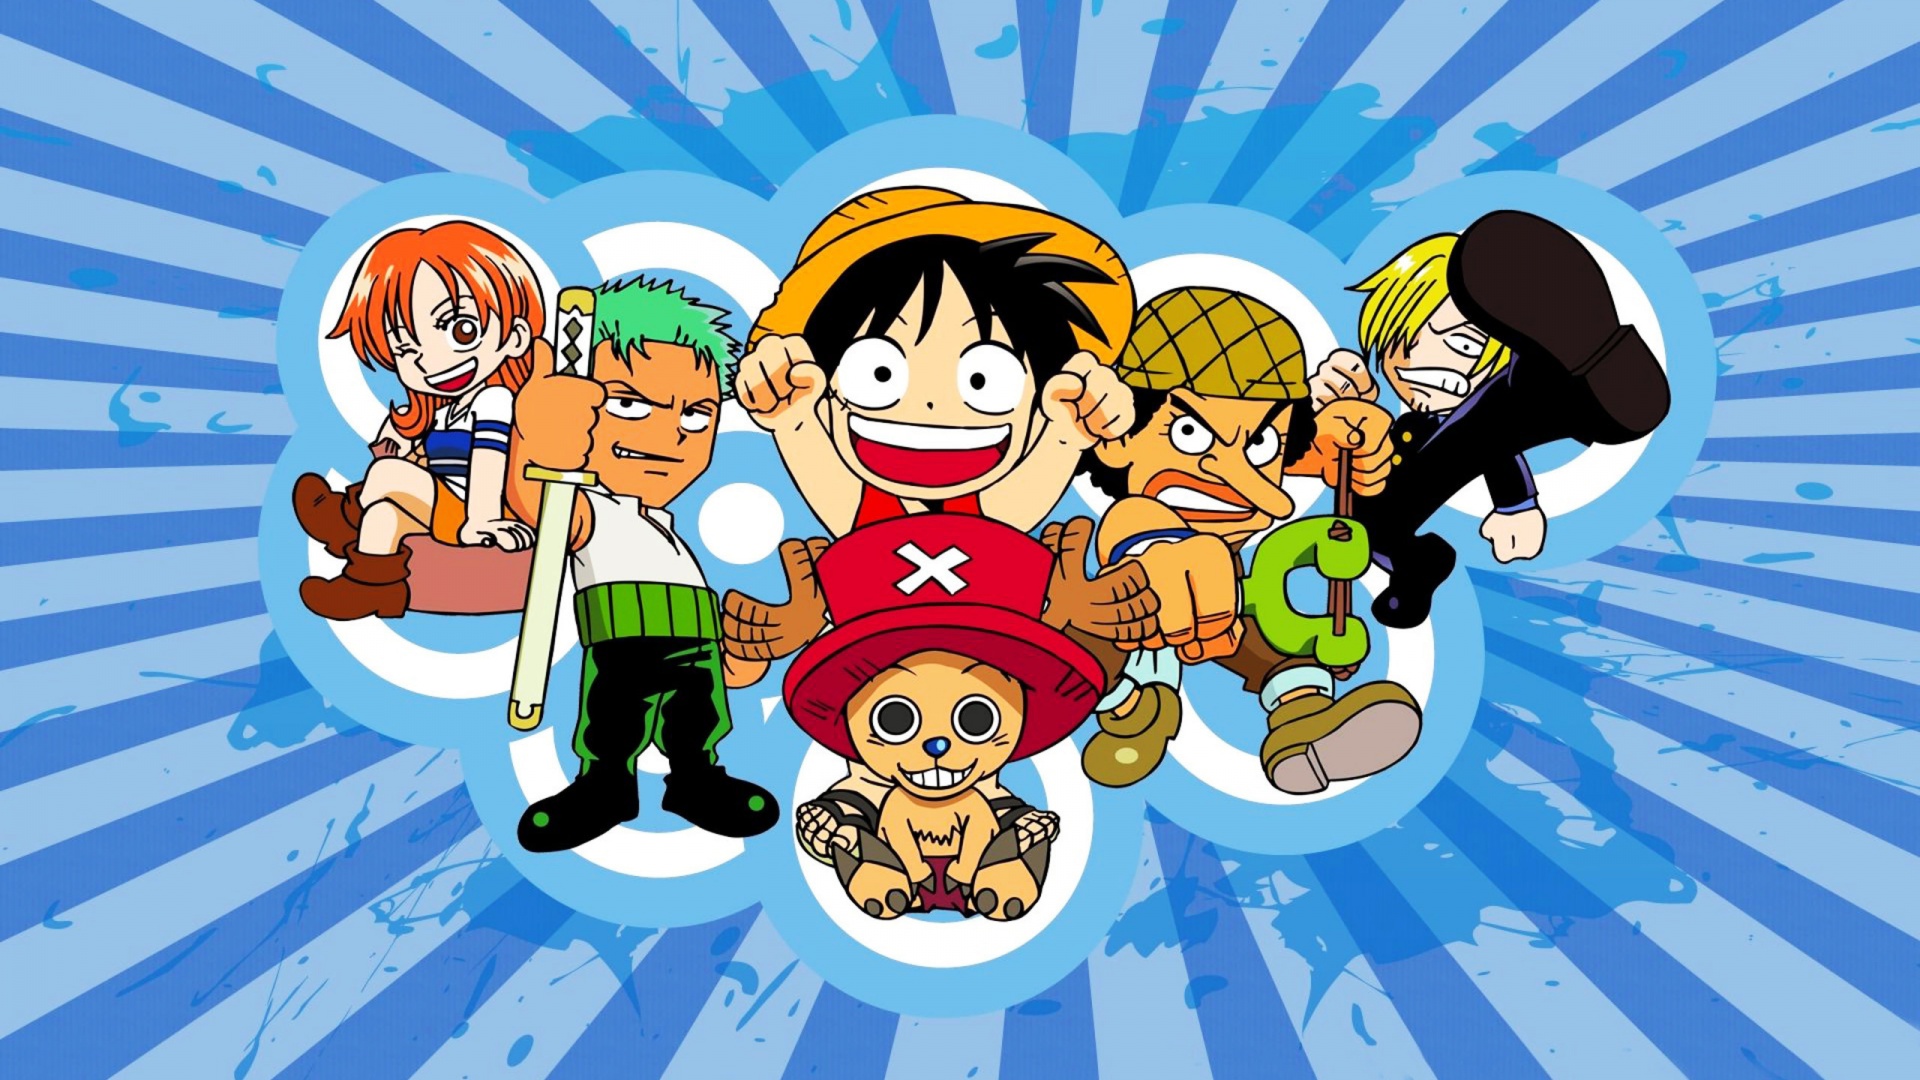 One Piece Wallpaper of The Straw Hat Pirates (47 Pics) Wallpaper. Wallpaper Download. High Resolution Wallpaper